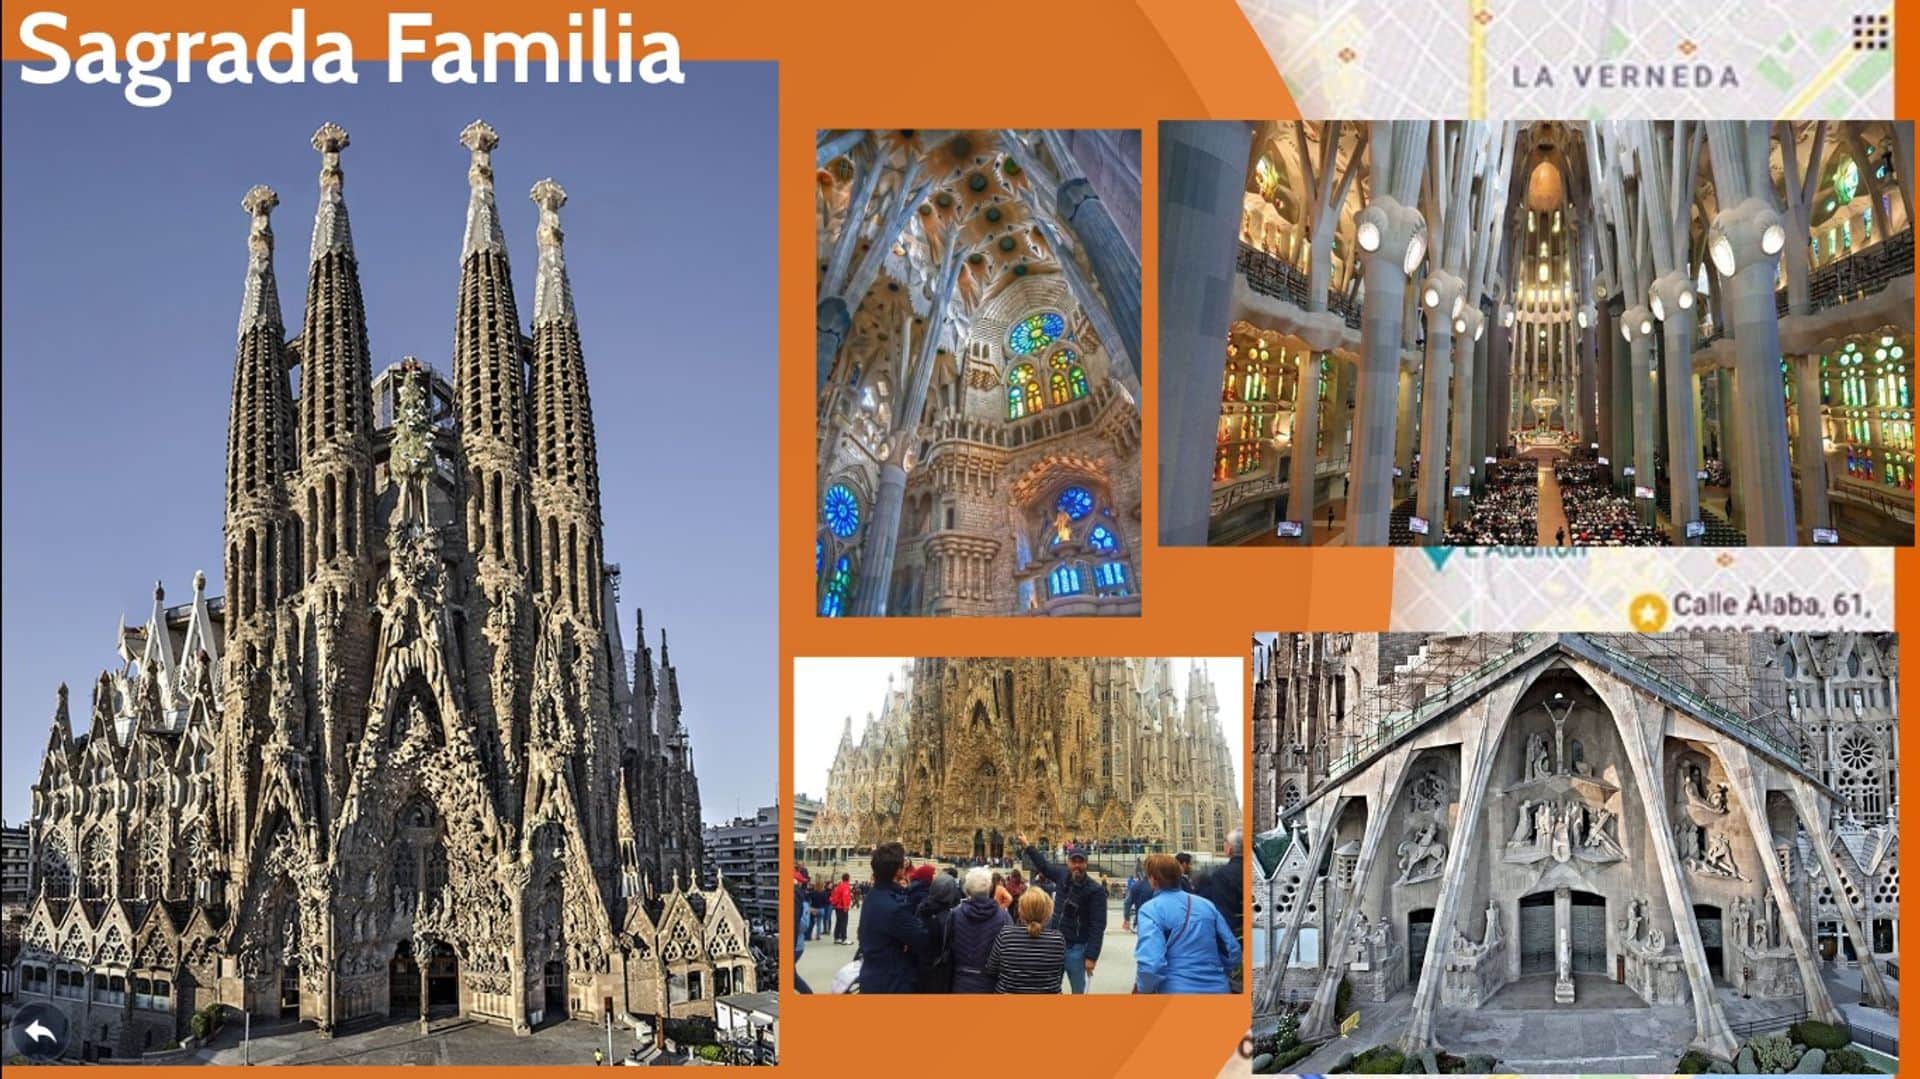 Barcelona Highlights Interactive Small Group Virtual Tour - In out Barcelona Tours